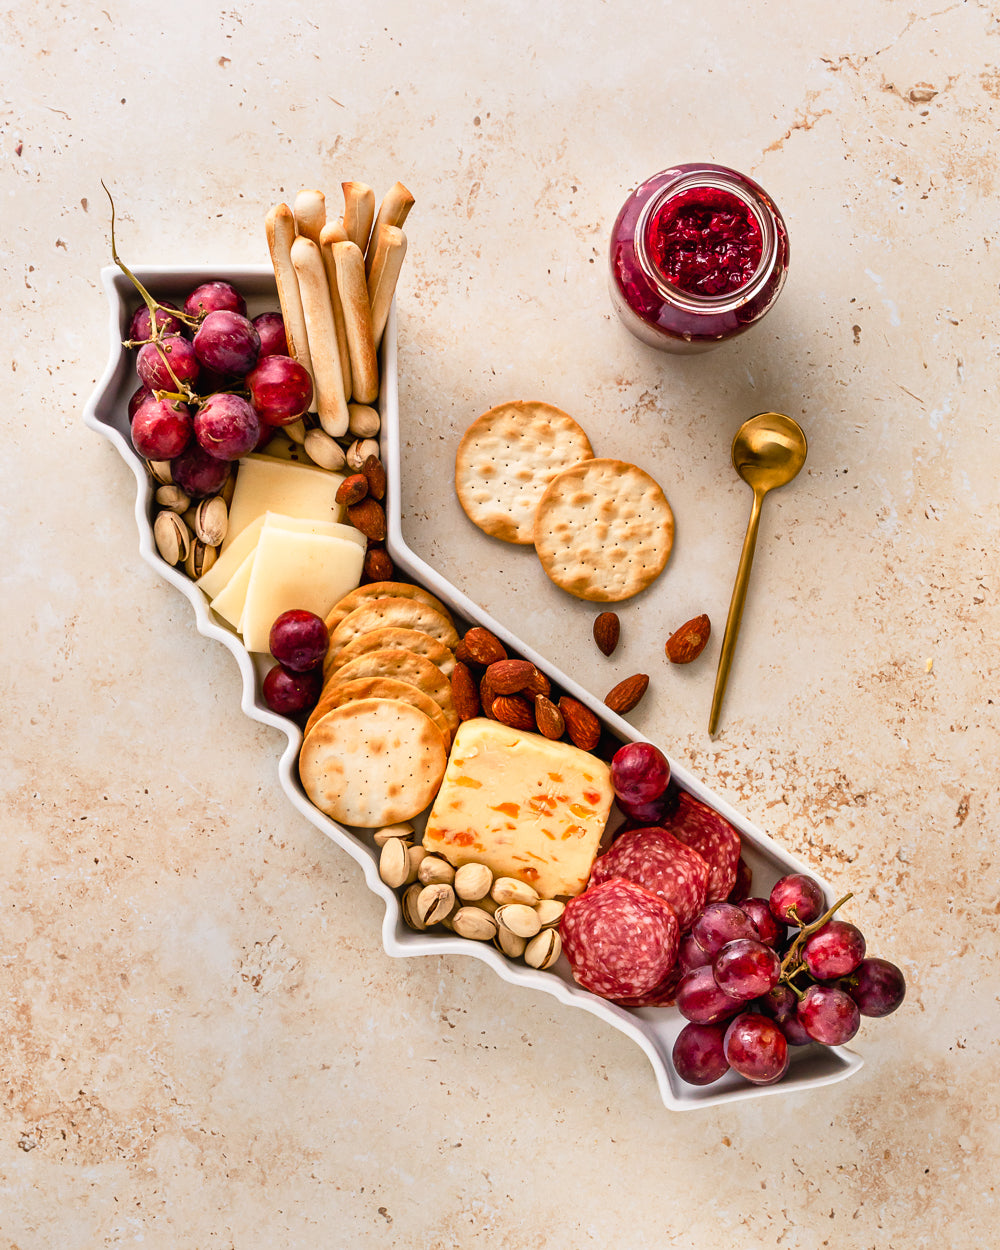 charcuterie board with cheese and cured meats in a california shaped serving tray platter dish